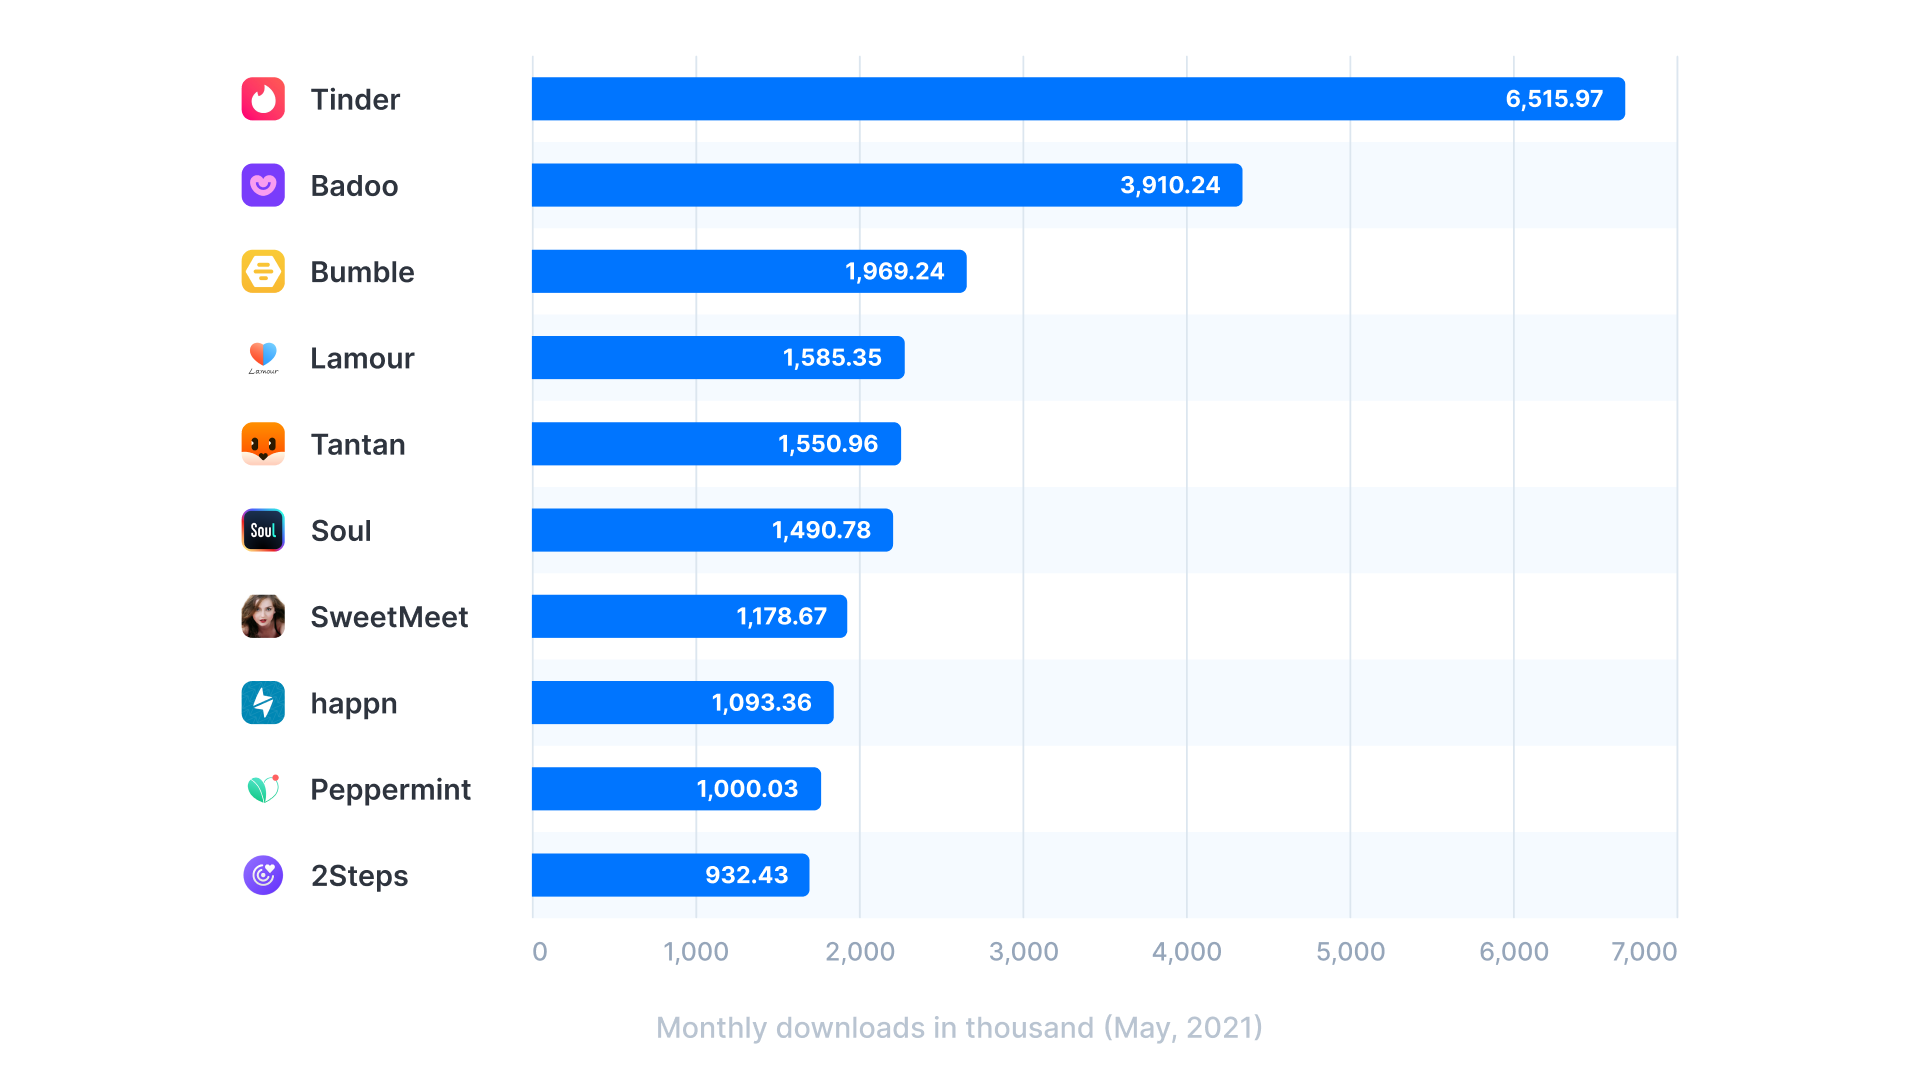 Most popular dating apps worldwide as of May 2021, by number of monthly downloads (in 1,000s) worldwide as of May 2021, by number of monthly downloads (in 1,000s)